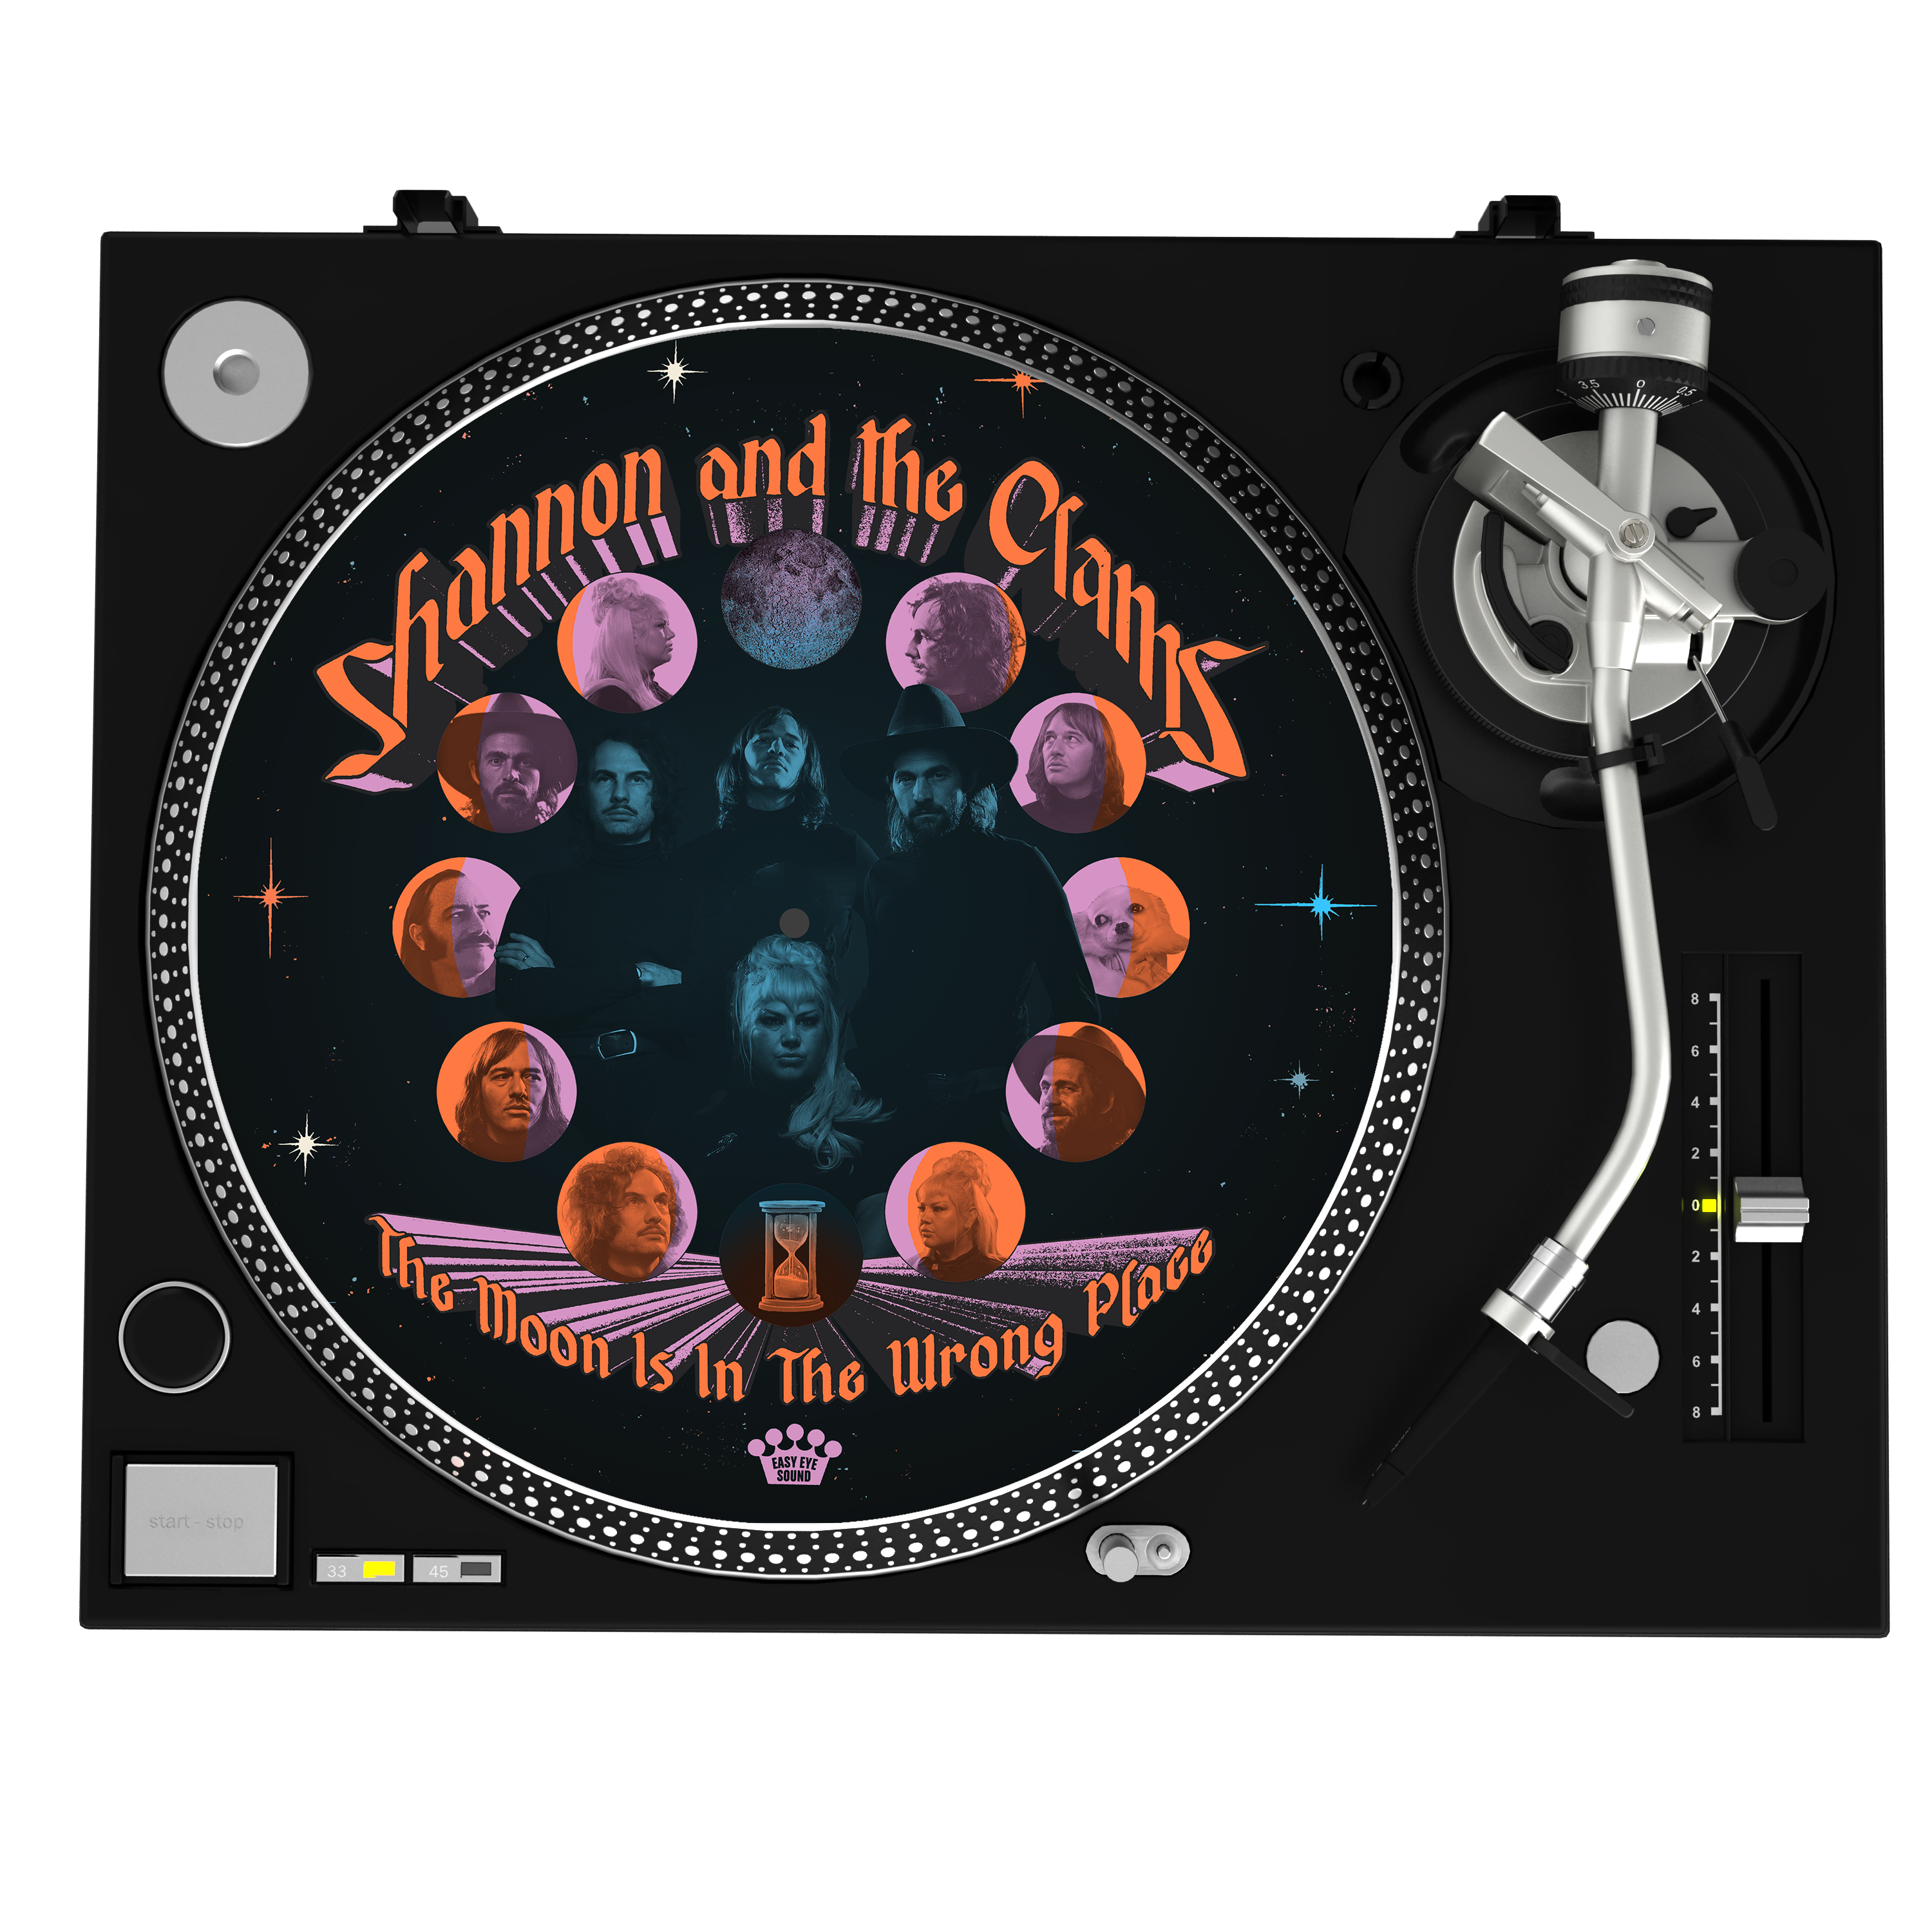 The Moon Is In The Wrong Place [Turntable Slipmat]